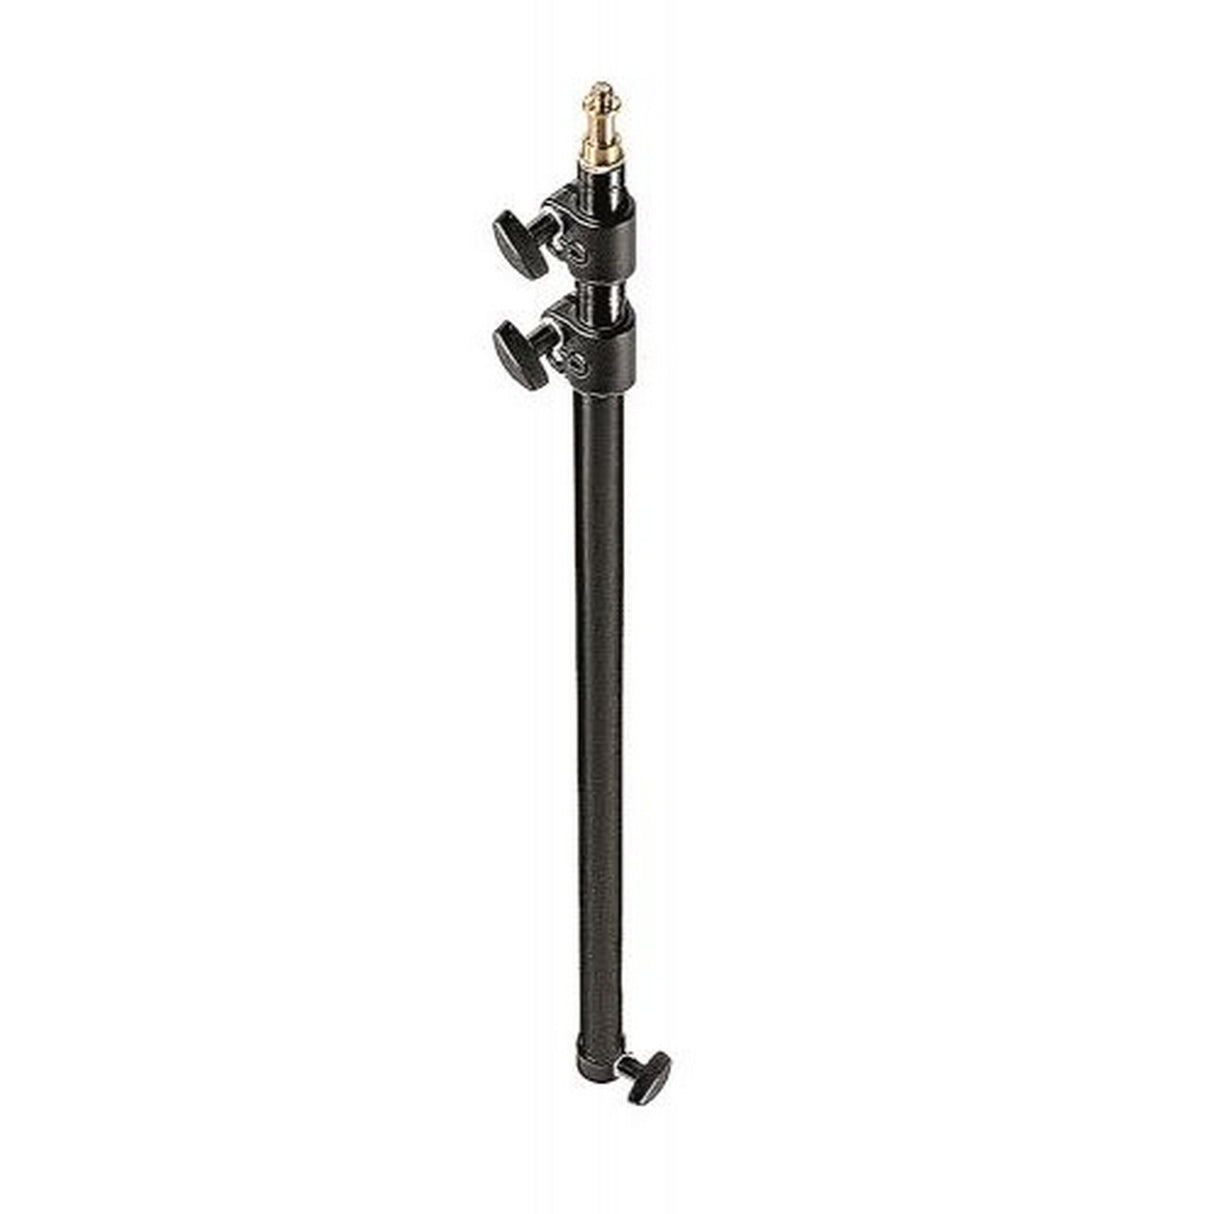 Manfrotto 099B 3-Section Extension Pole for Light Stands, 35-92 Inches, Black